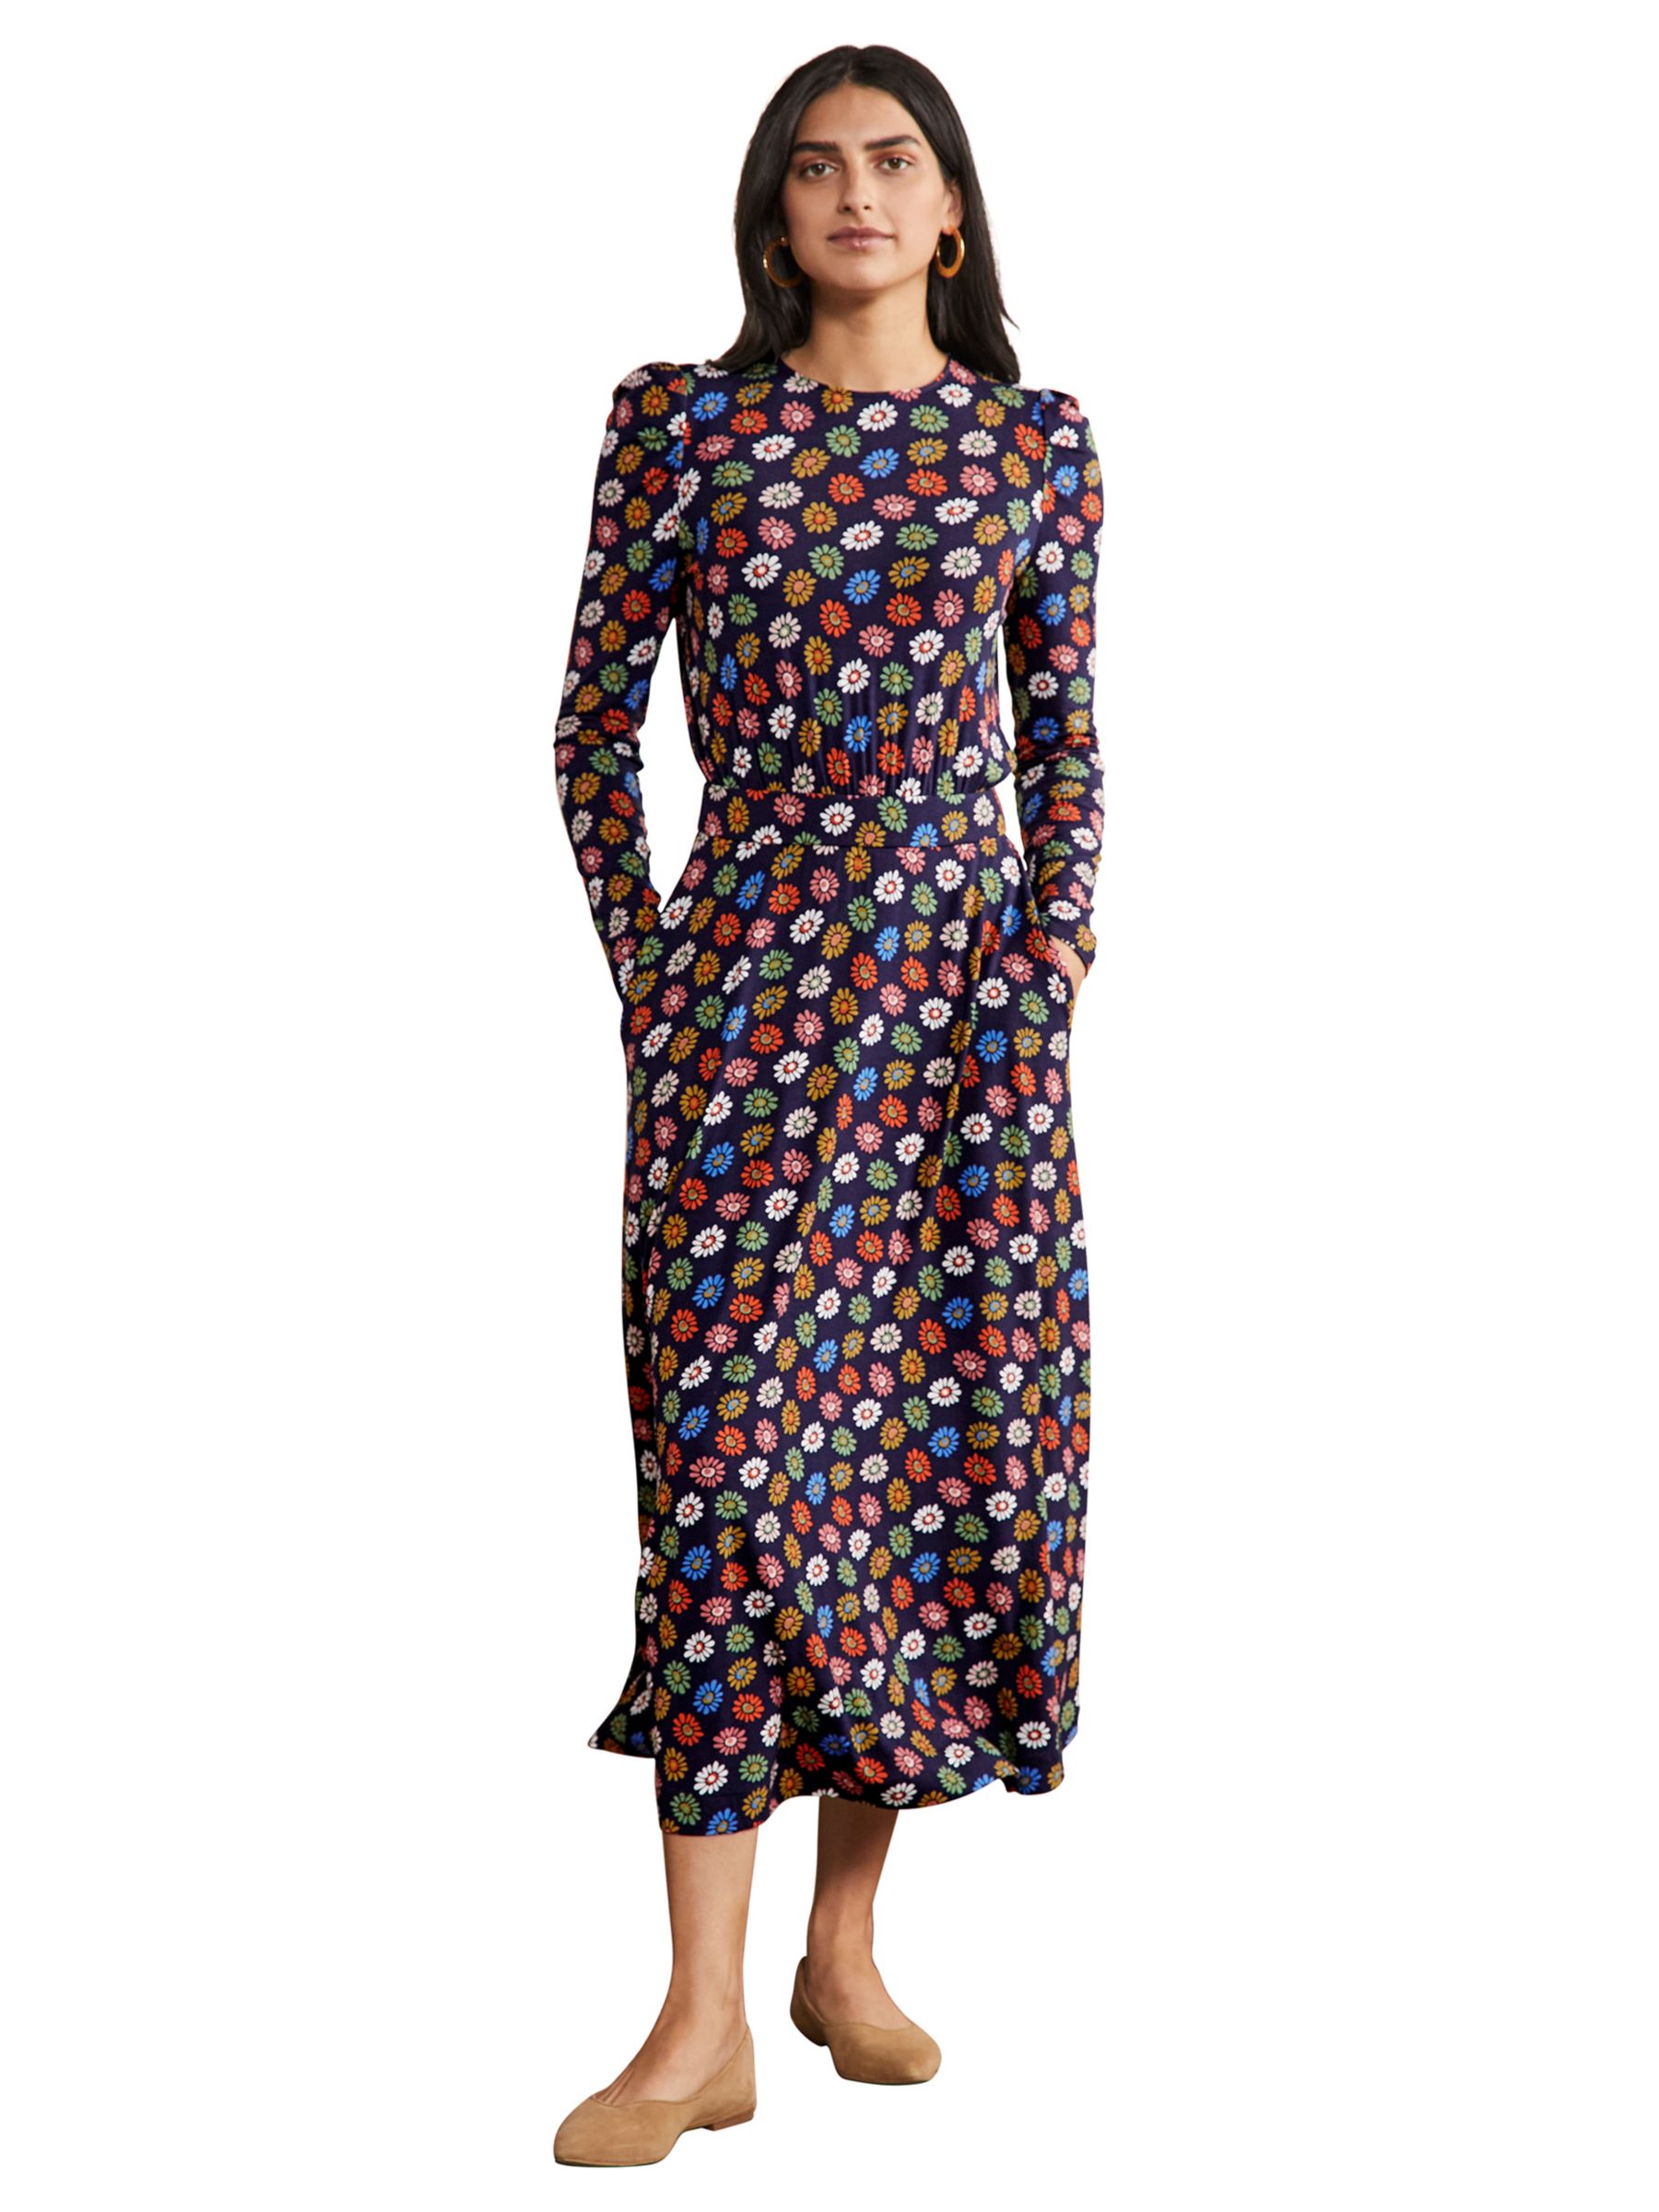 Boden Floral Print Puff Sleeve Jersey Midi Dress, French Navy/Rainbow, 18